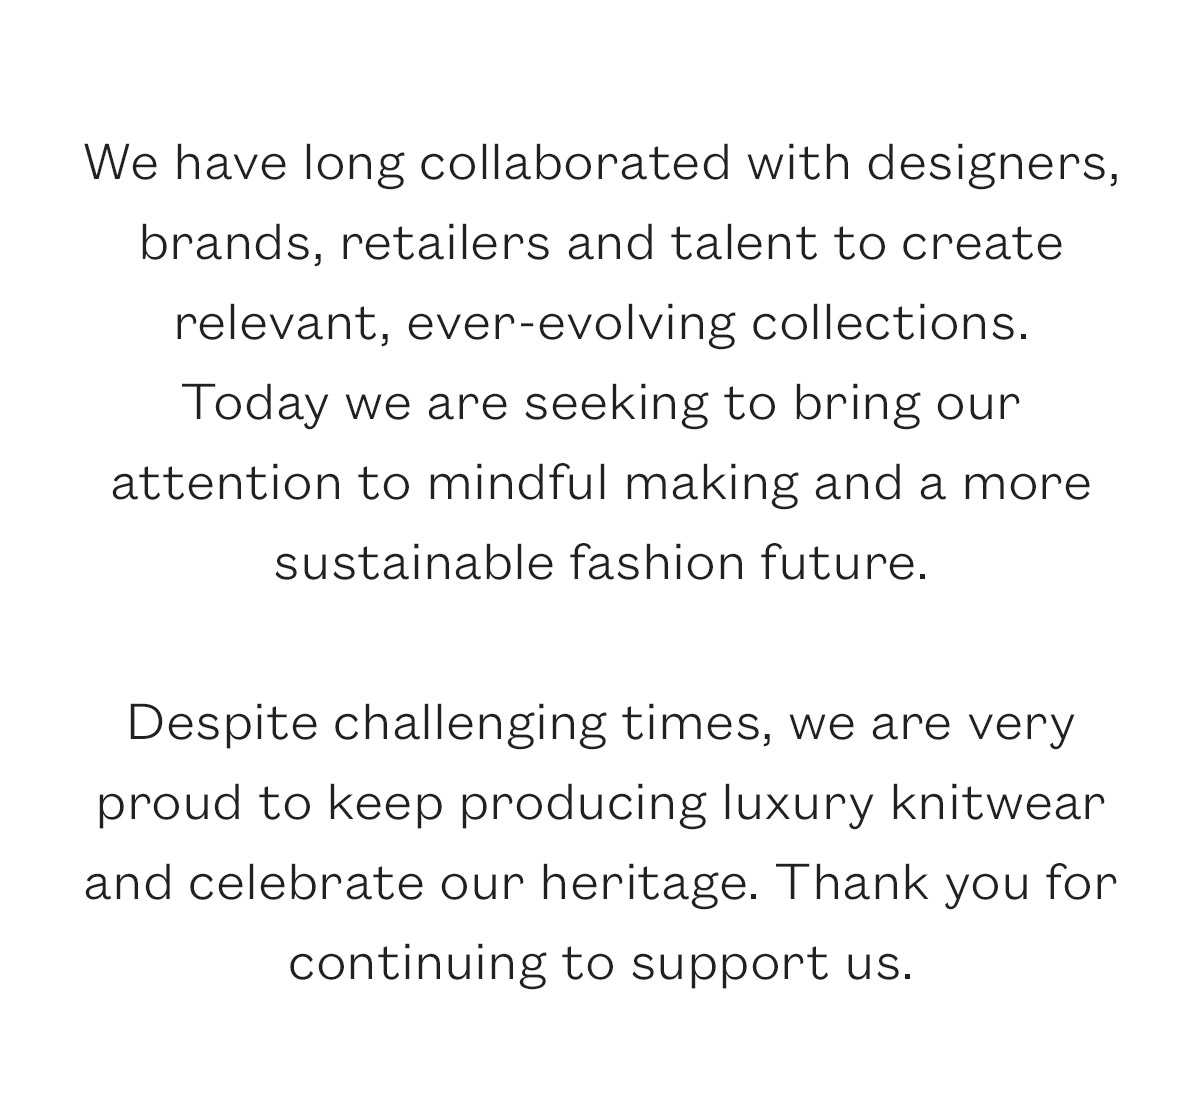 We have long collaborated with designers, brands, retailers and talent to create relevant, ever-evolving collections.  Today we are seeking to bring our attention to mindful making and a more sustainable fashion future.   Despite challenging times, we are very proud to keep producing luxury knitwear and celebrate our heritage. Thank you for continuing to support us.